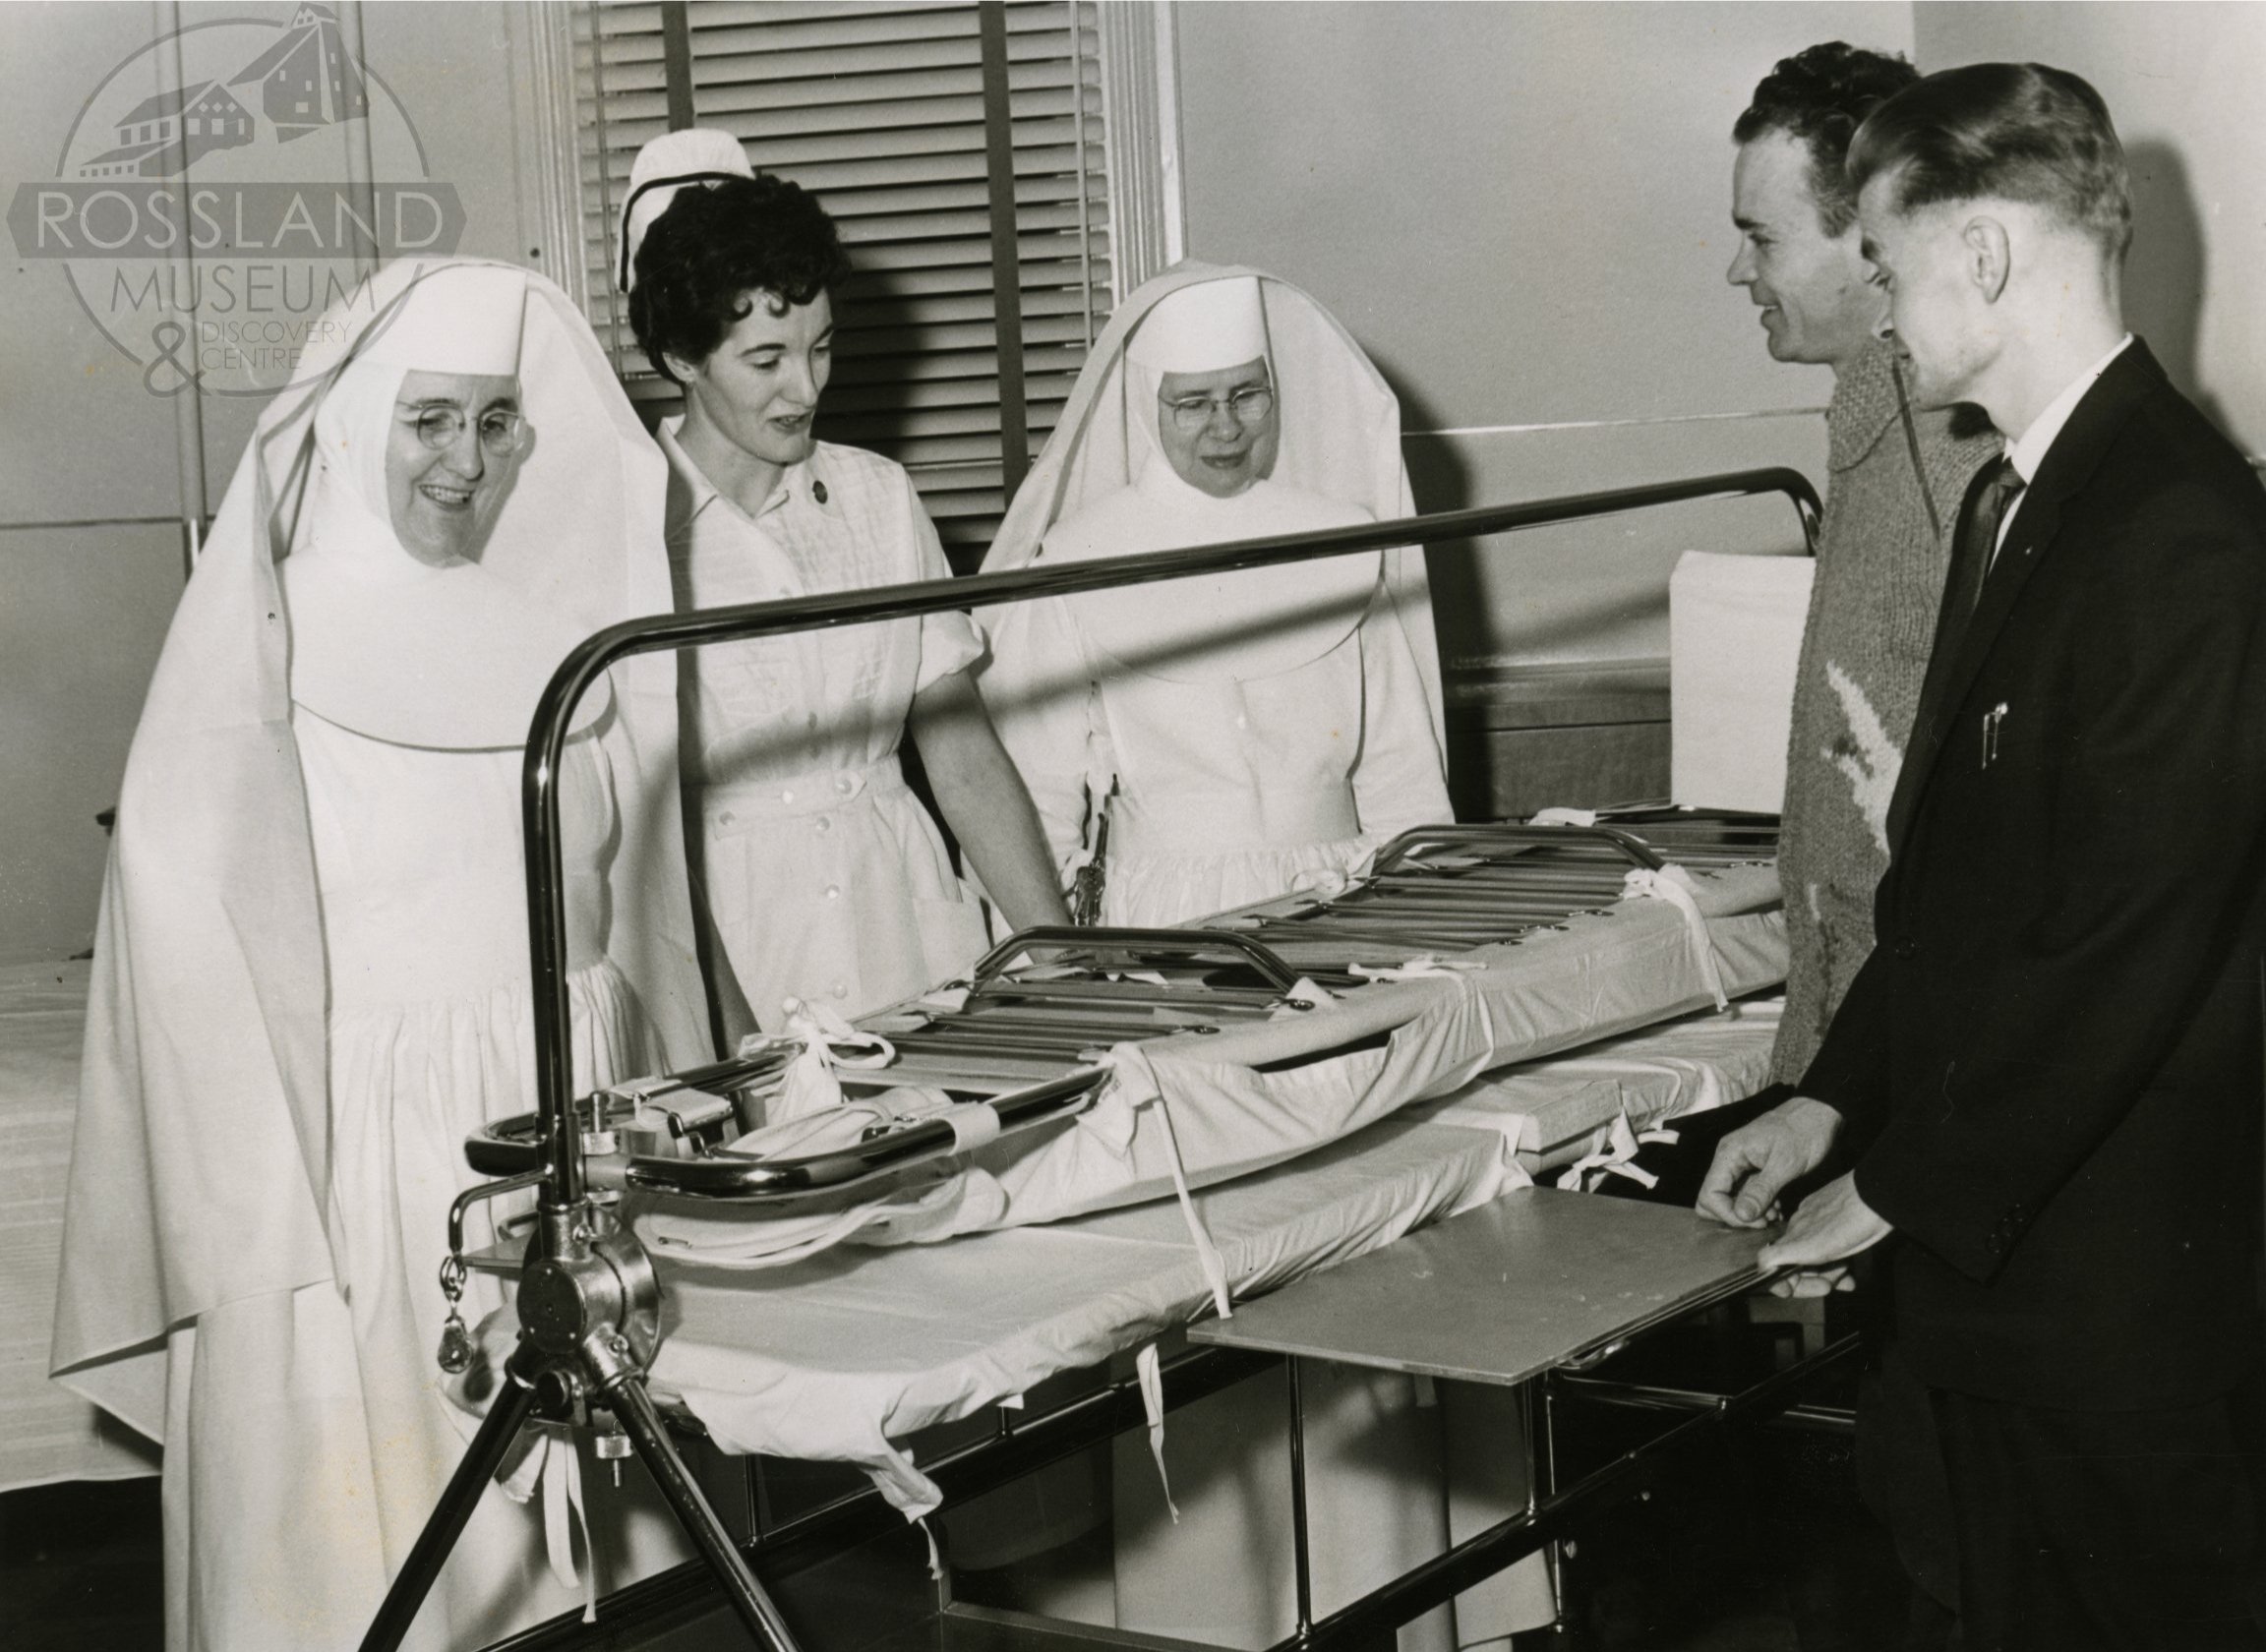   2276.0356 : Demonstration of new hospital equipment at Mater Misericordiae Hospital, January 23, 1958. Left to Right: Sister Angelo, Nurse Jean Barge, Sister Helena, "Sandy" Gordon, and Andy Chapdelaine of the Kinsman Club. 